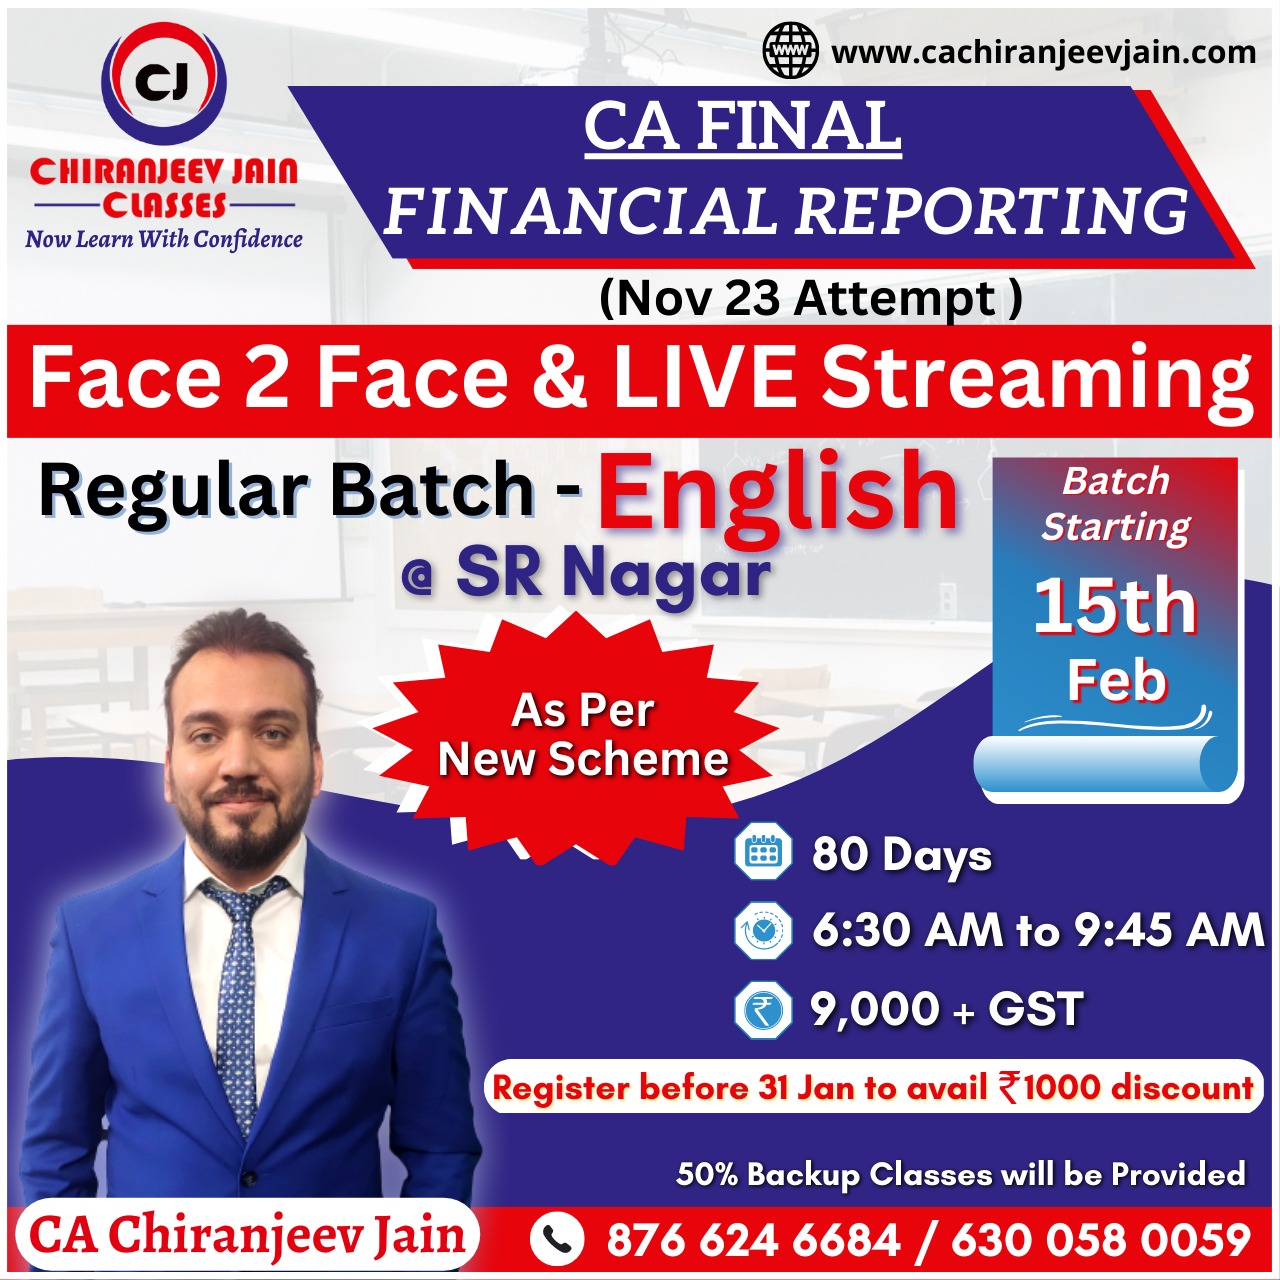 CA Final – Financial Reporting – Face To Face & Live Streaming Batch (English)